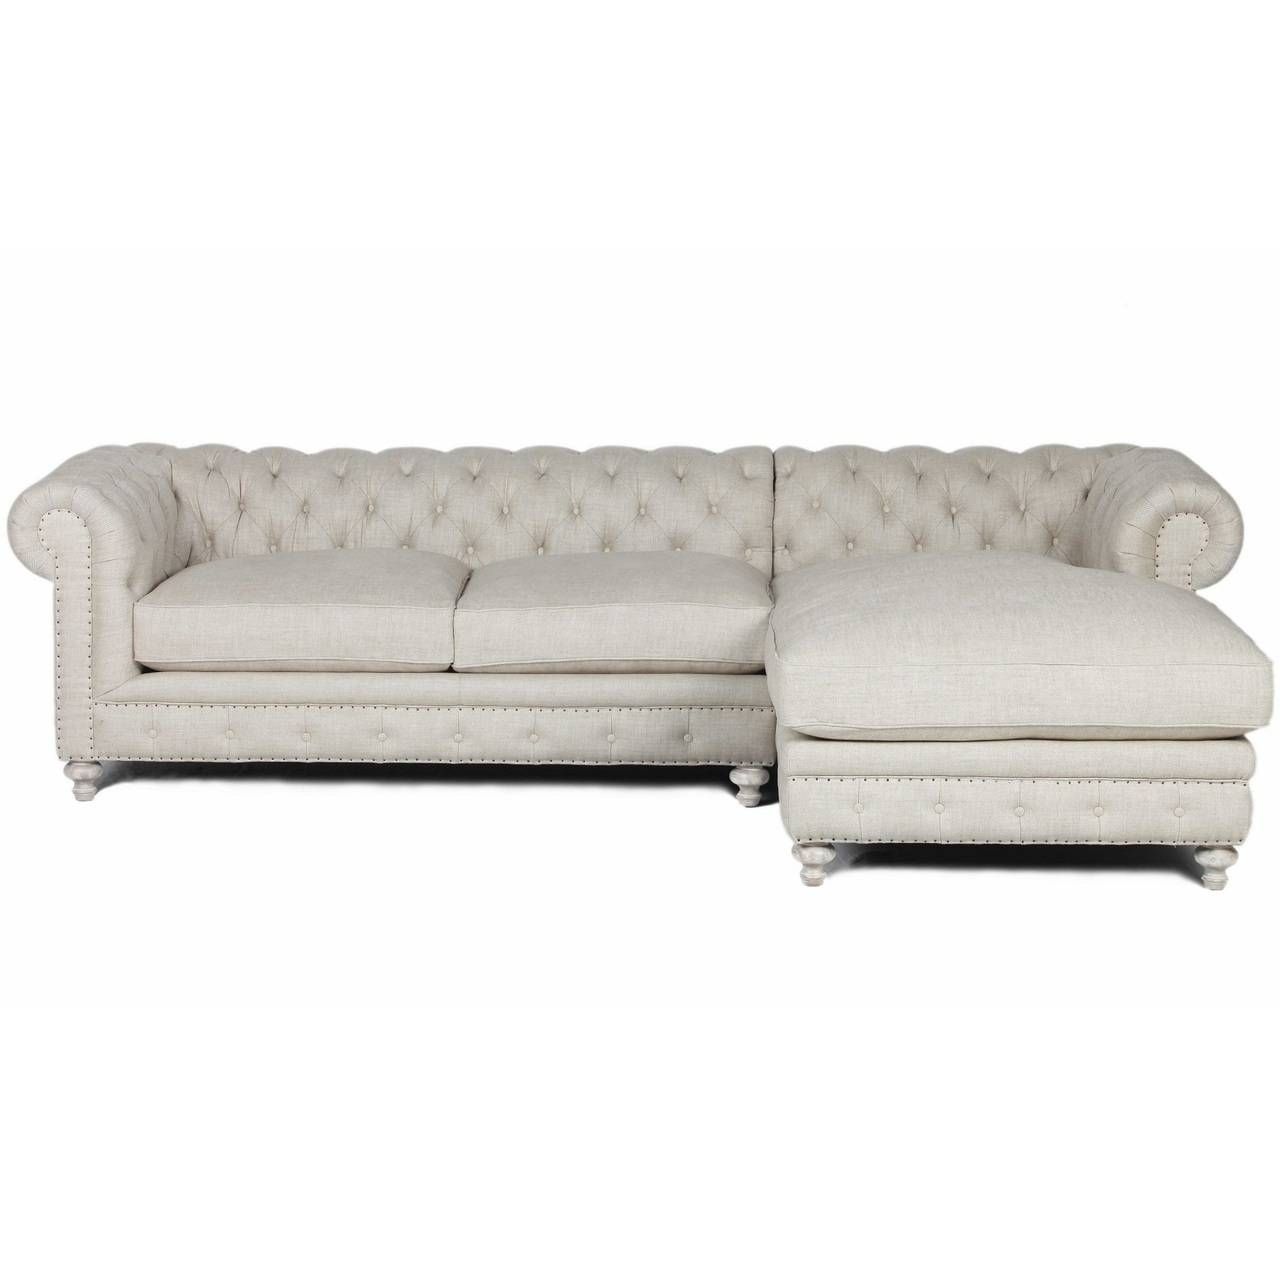 Sofa: Cheap Sectionals | Velvet Tufted Sofa | Tufted Sectional Sofa For Tufted Sectional Sofa Chaise (View 8 of 25)